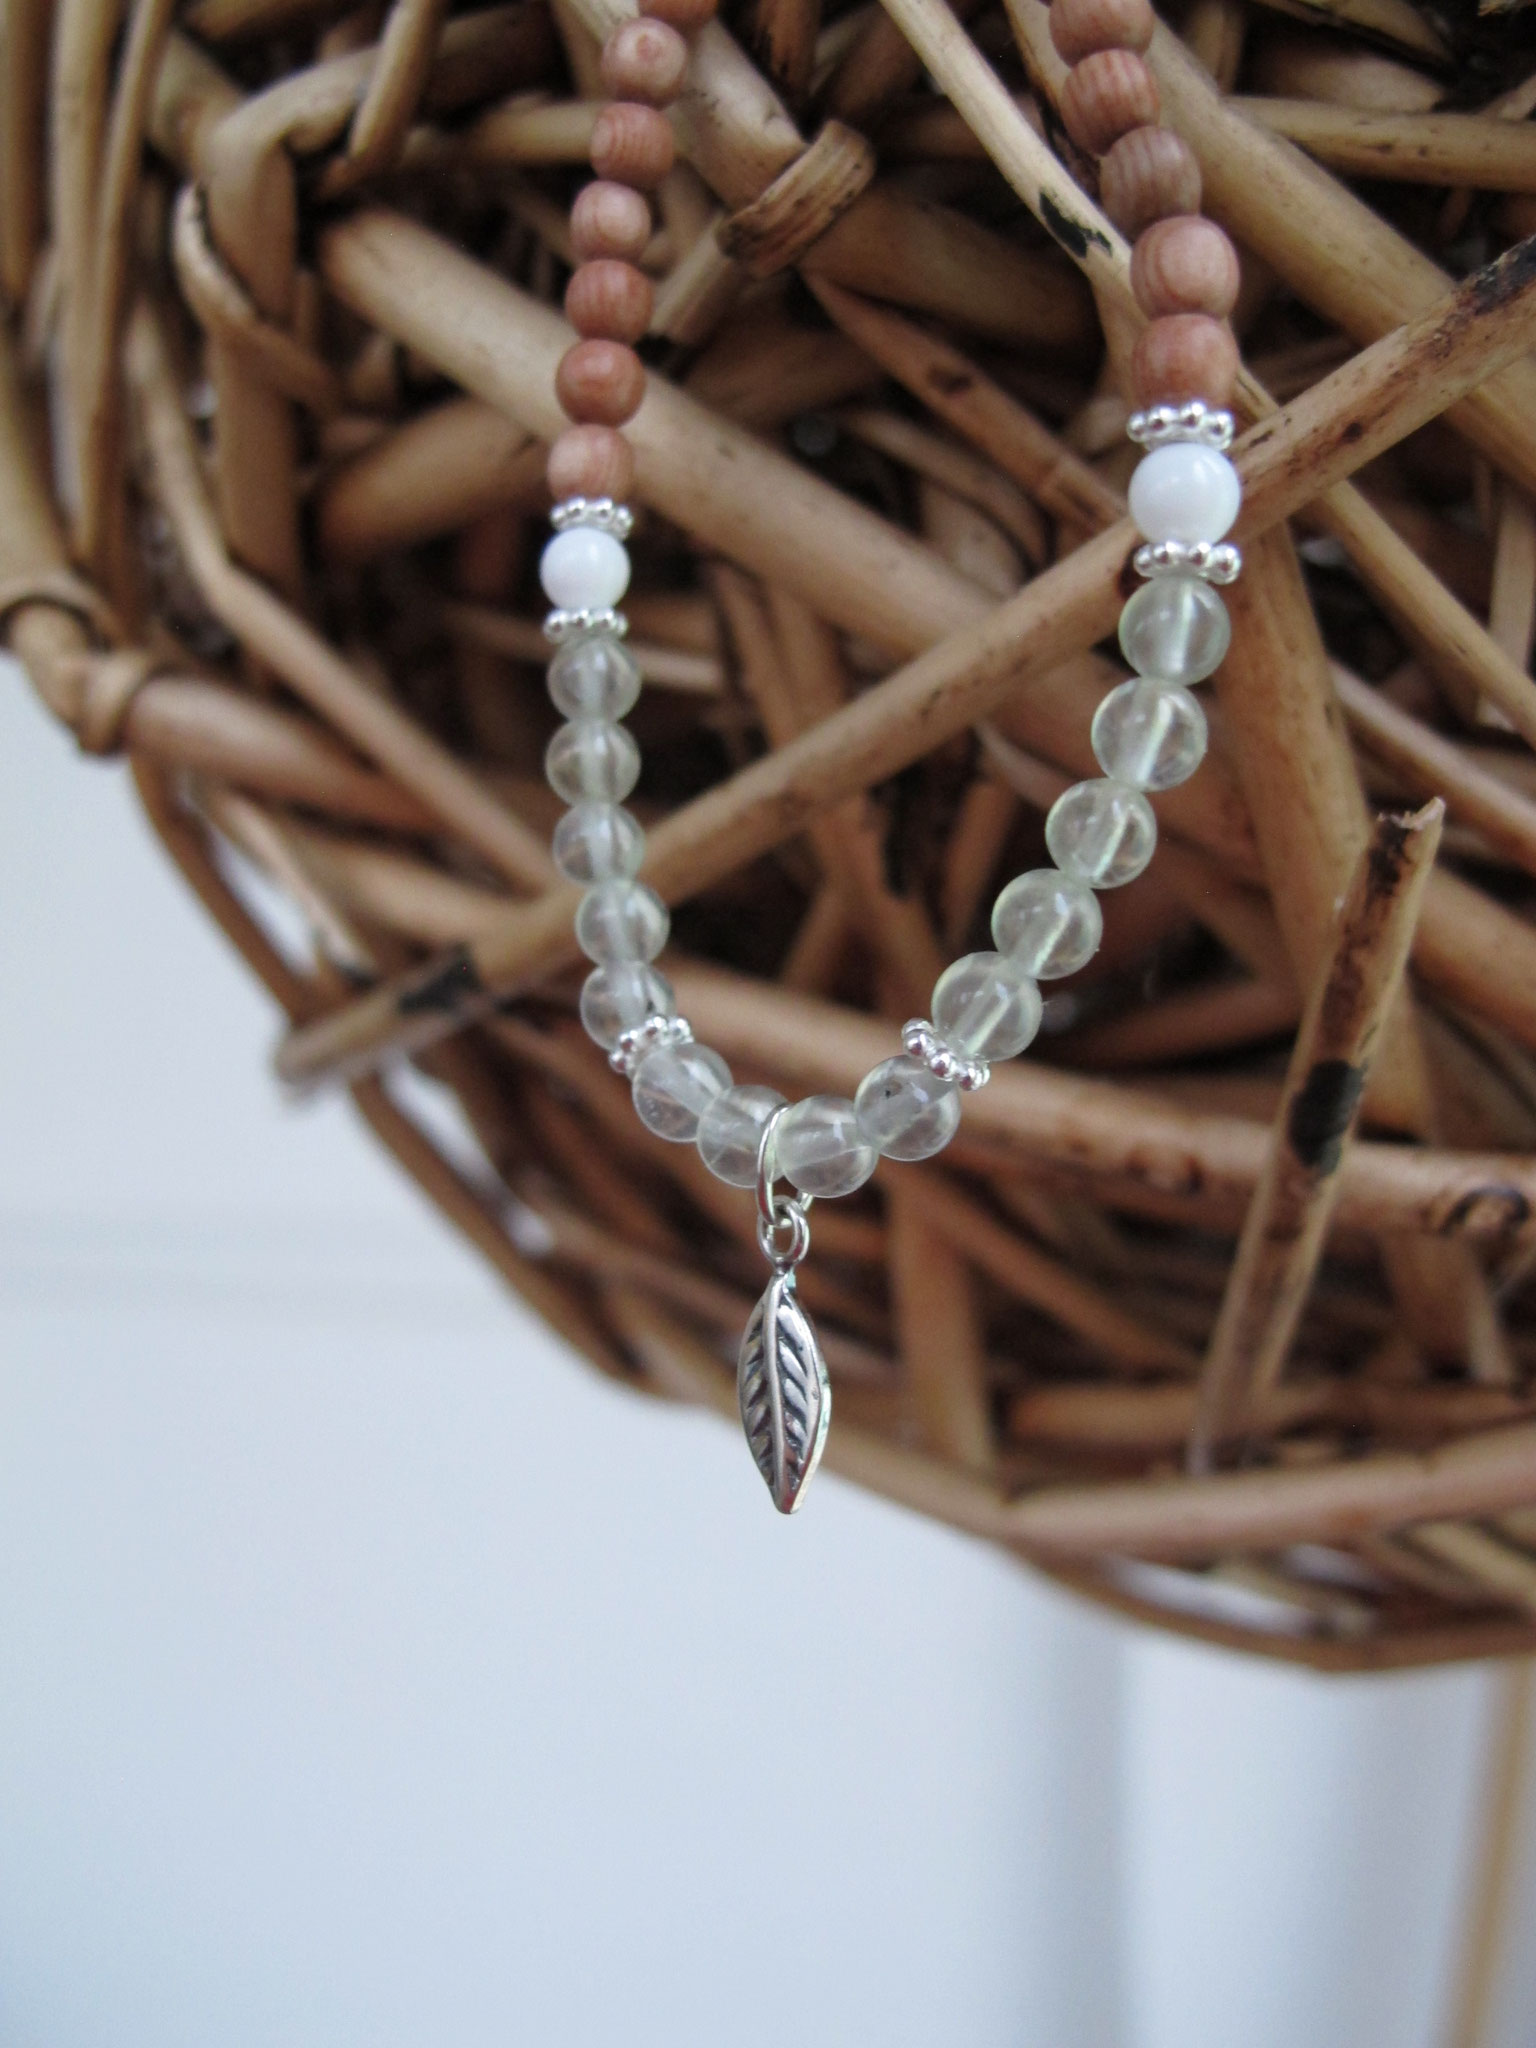 Gentle combination of rosewood and prehnite with dots of white jade and 925 Sterling silver leaf charm